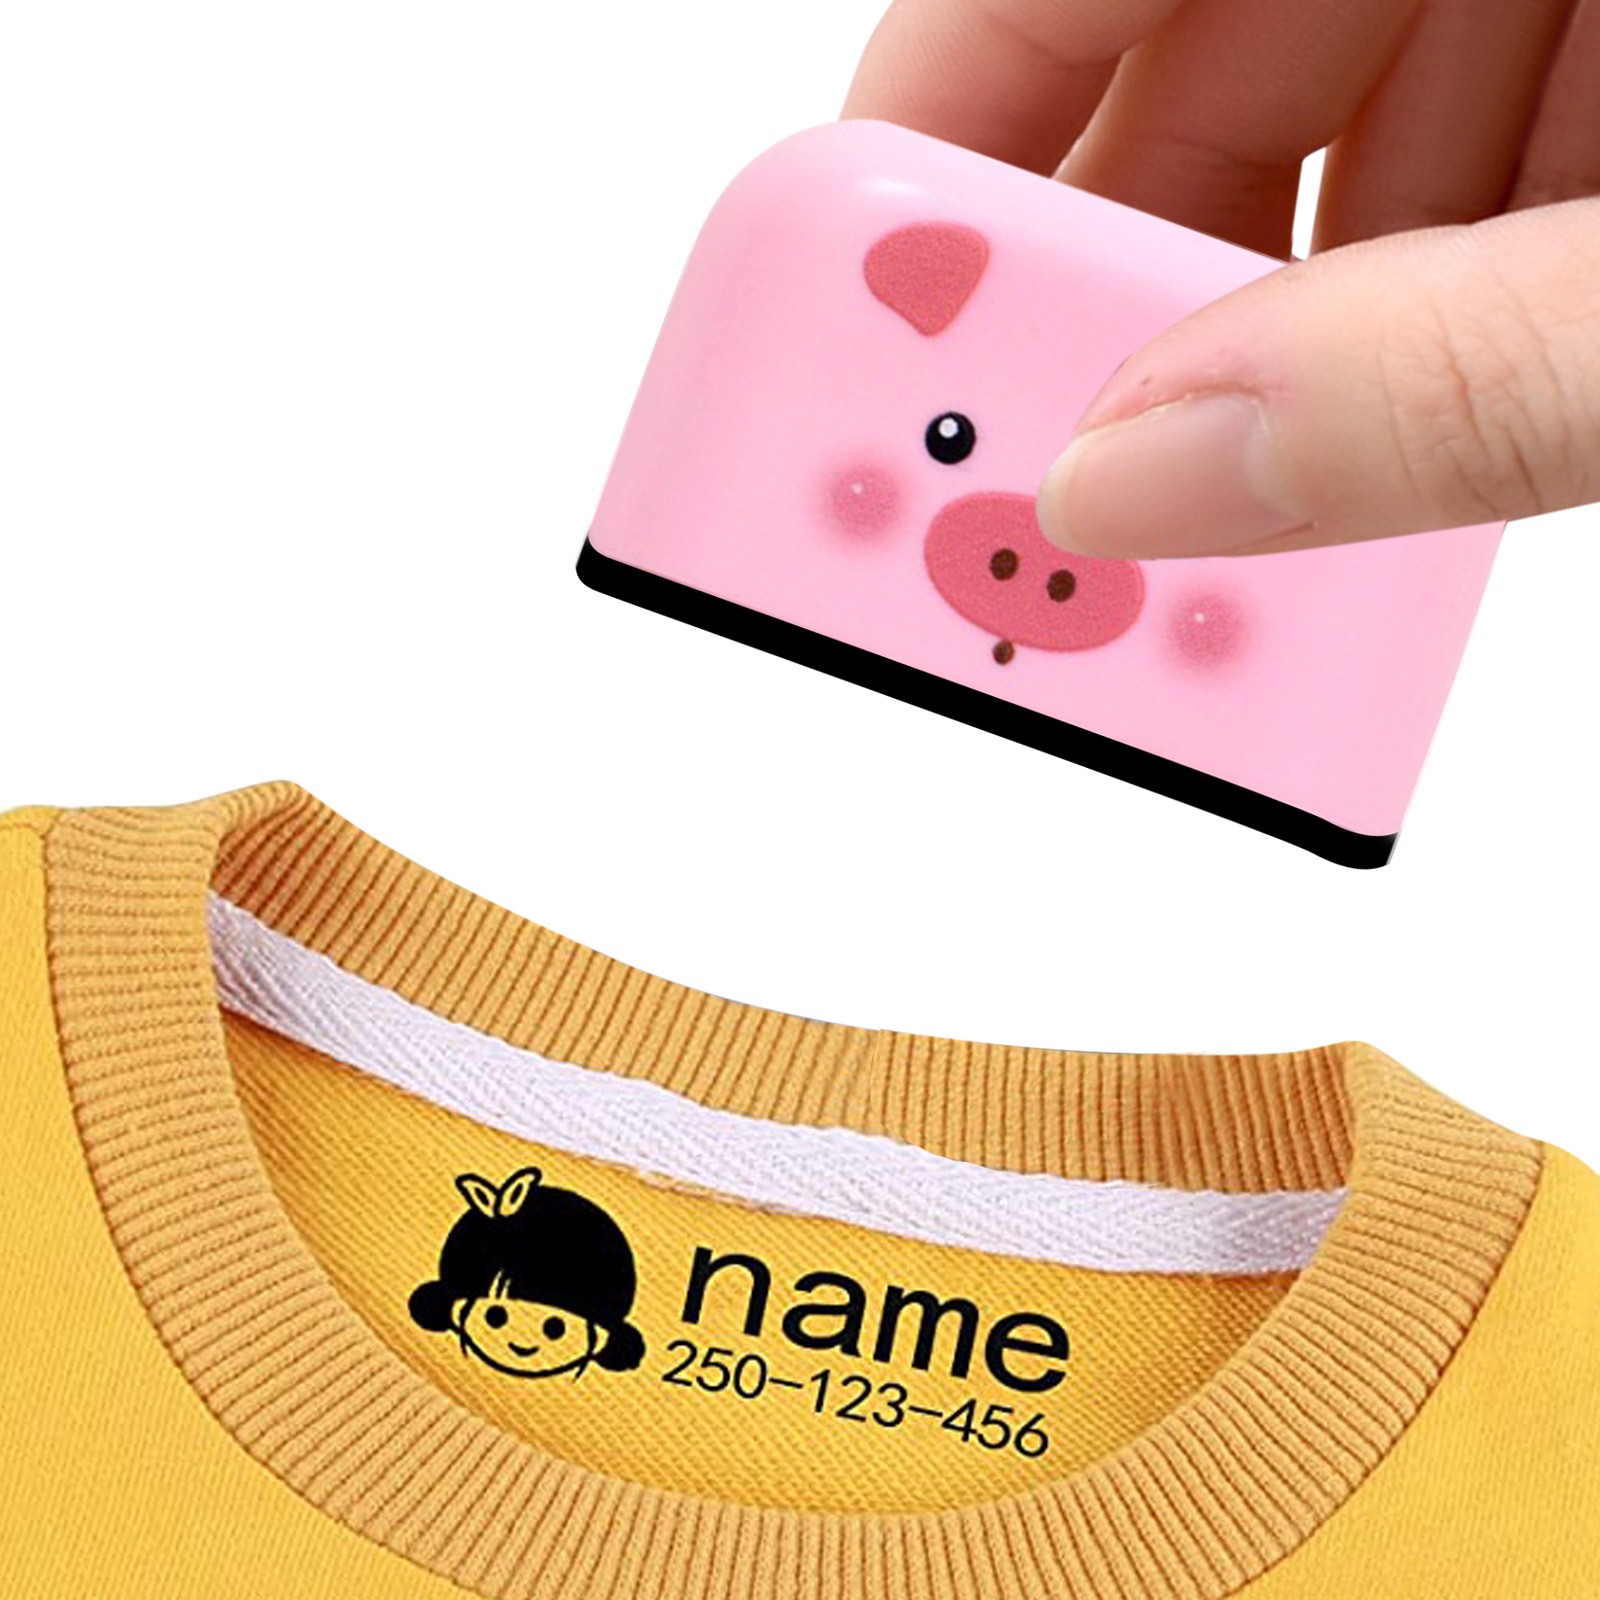 Tools Name Stamp For Clothing Name Stamp Personalized Stamp For Kids Cloths  Fabric Stamper For Clothes Pencil Sharpener